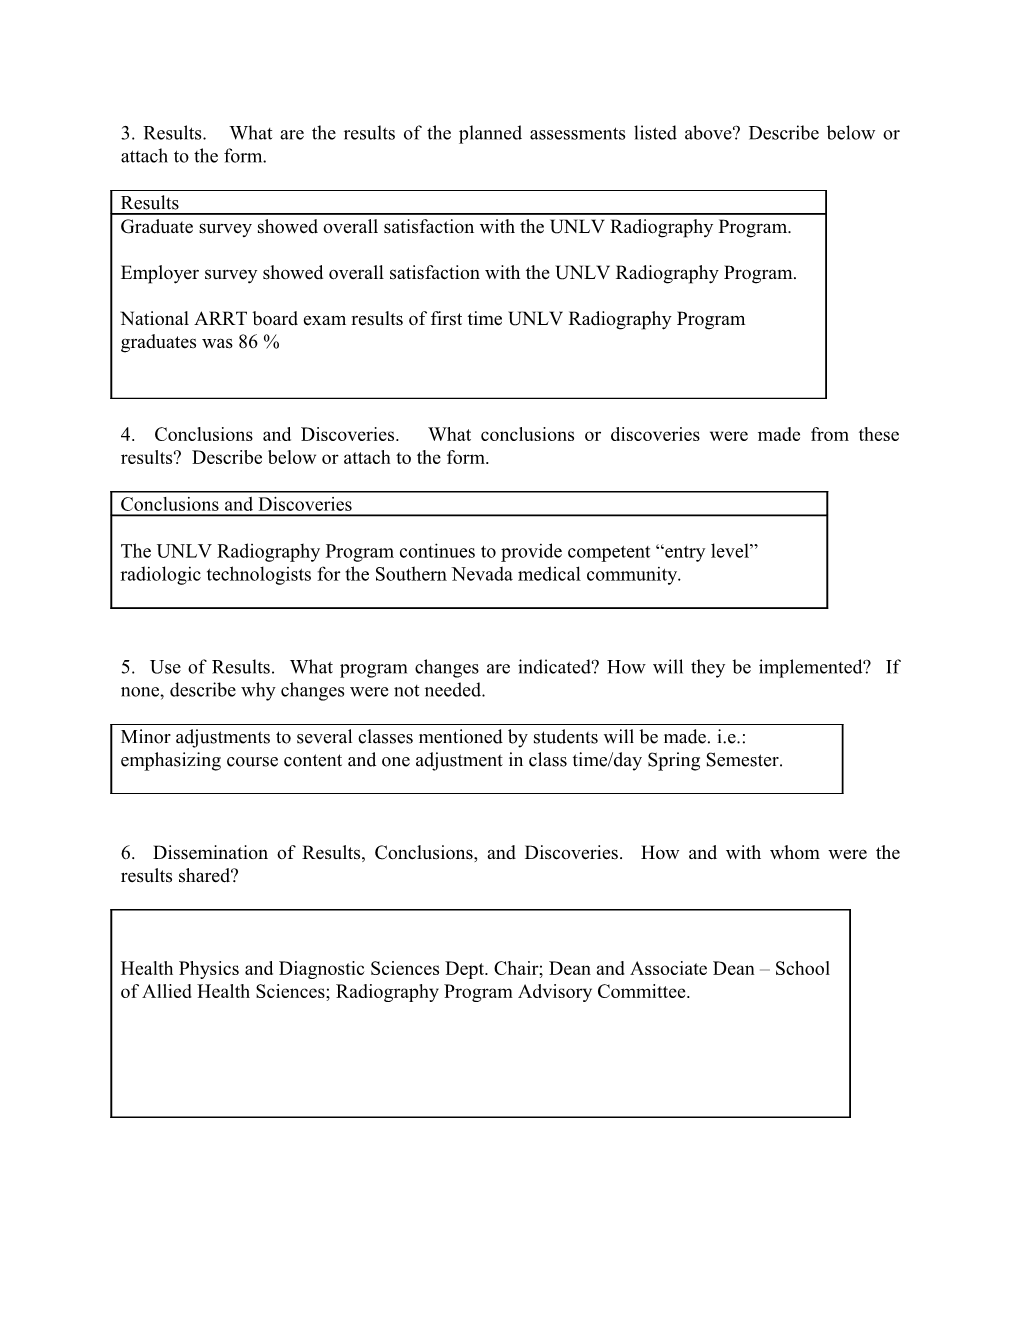 Annual Assessment Report Form for Student Learning Outcomes Assessment s1